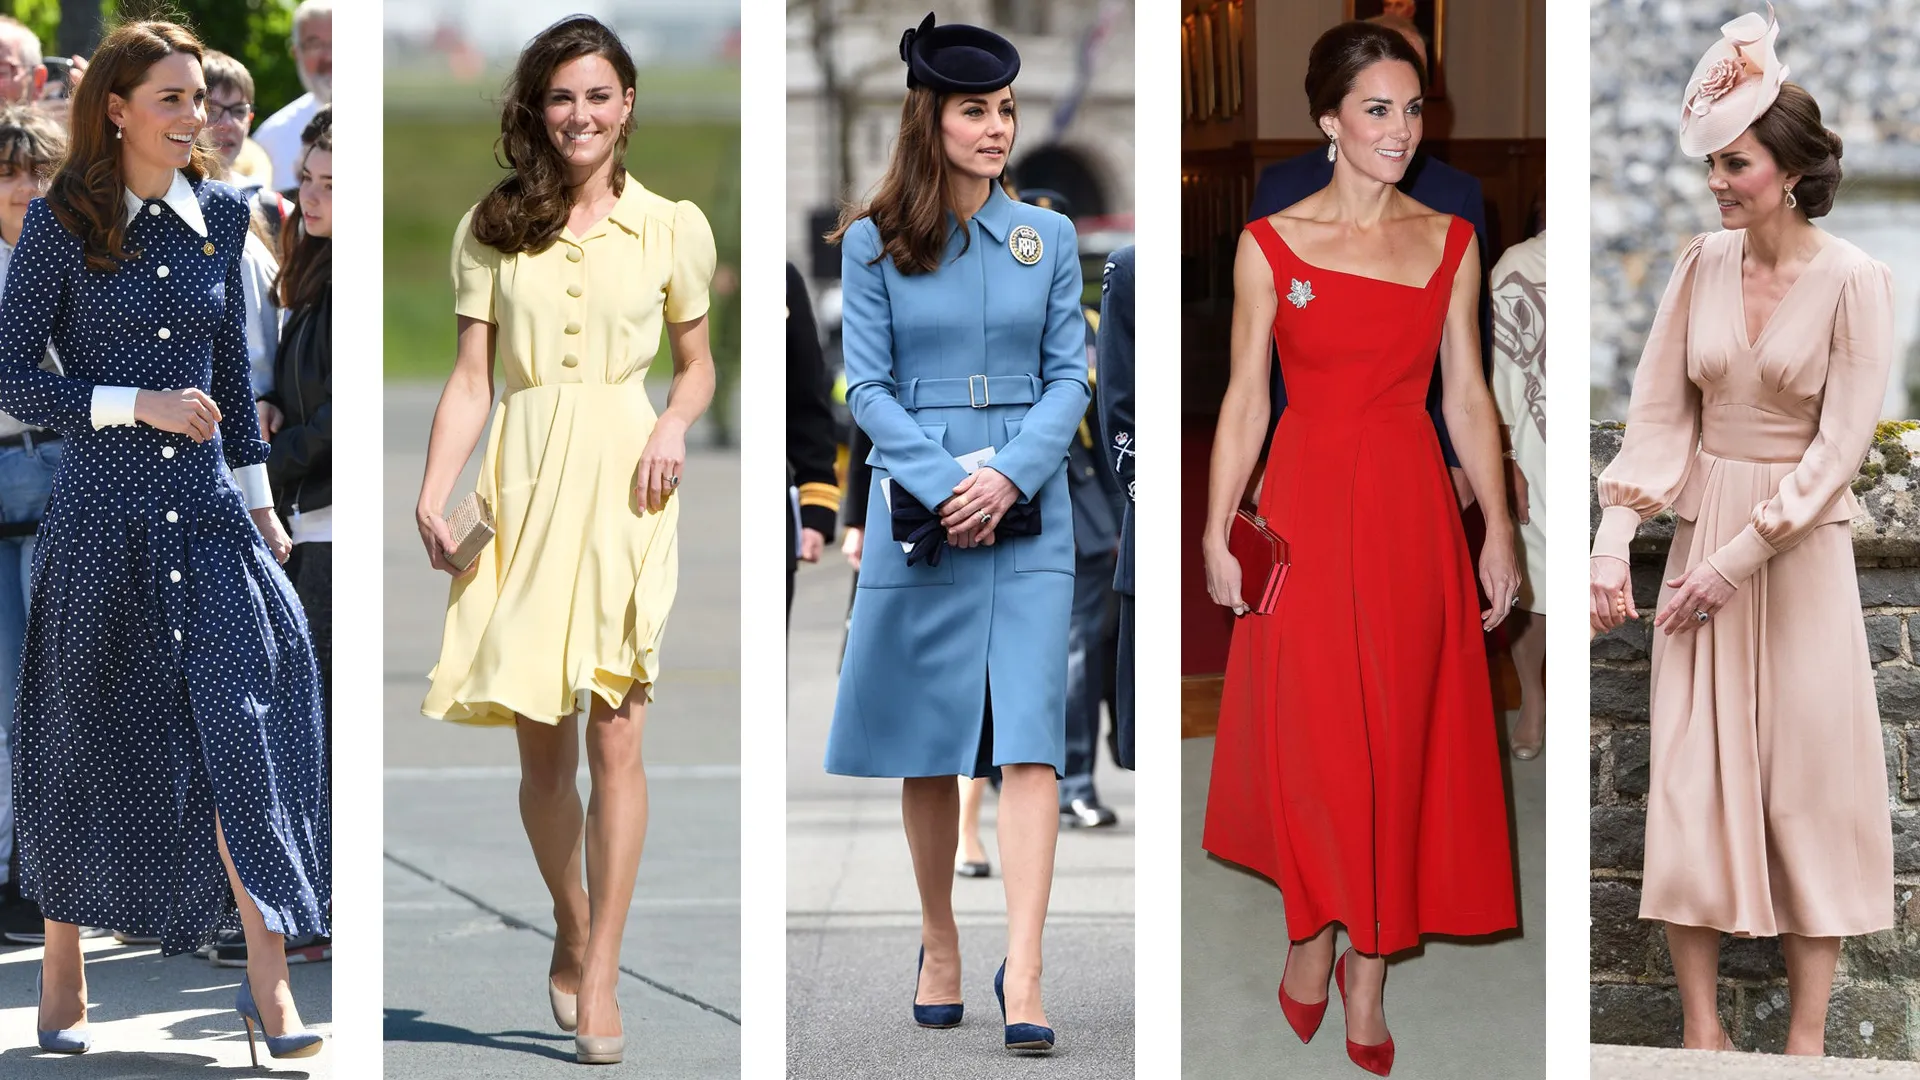 Kate Middleton's Chic Summer Style